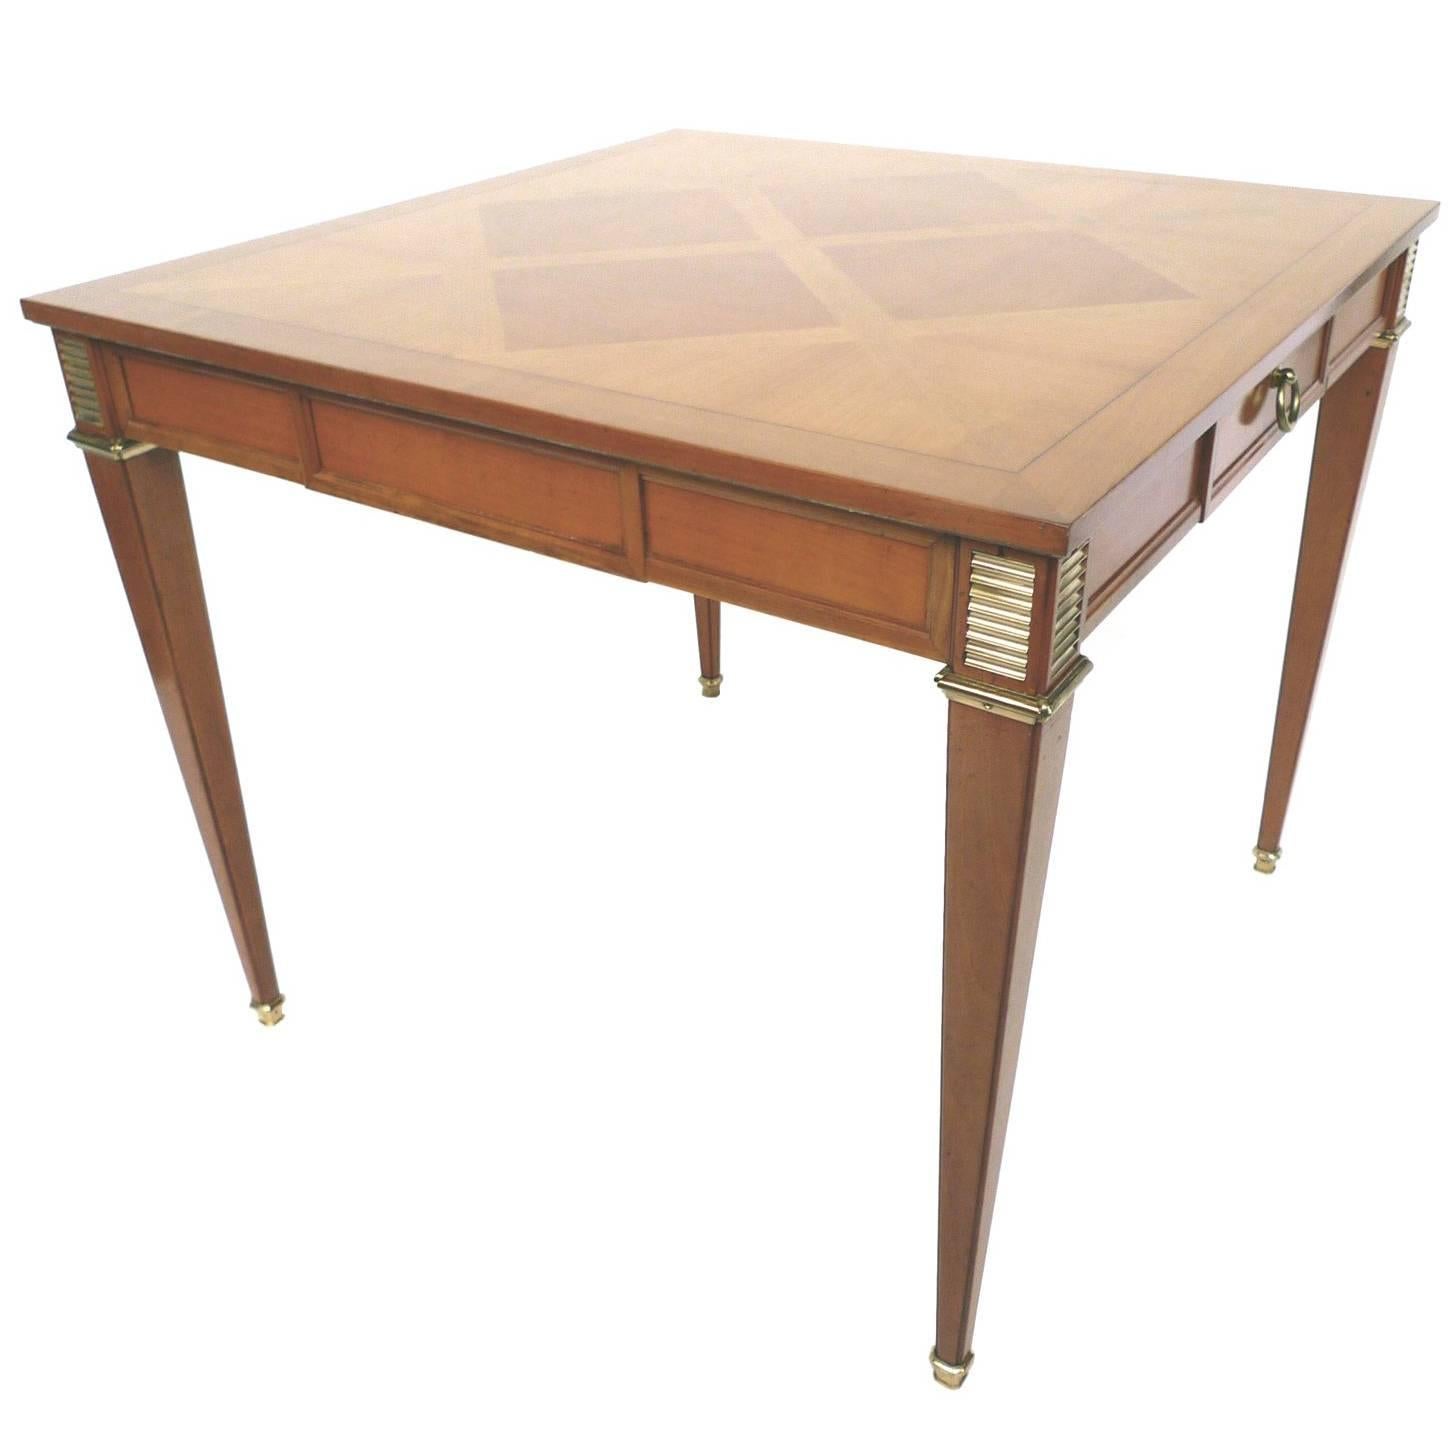 Mid-20th Century Blond Mahogany Game Table by Baker Furniture